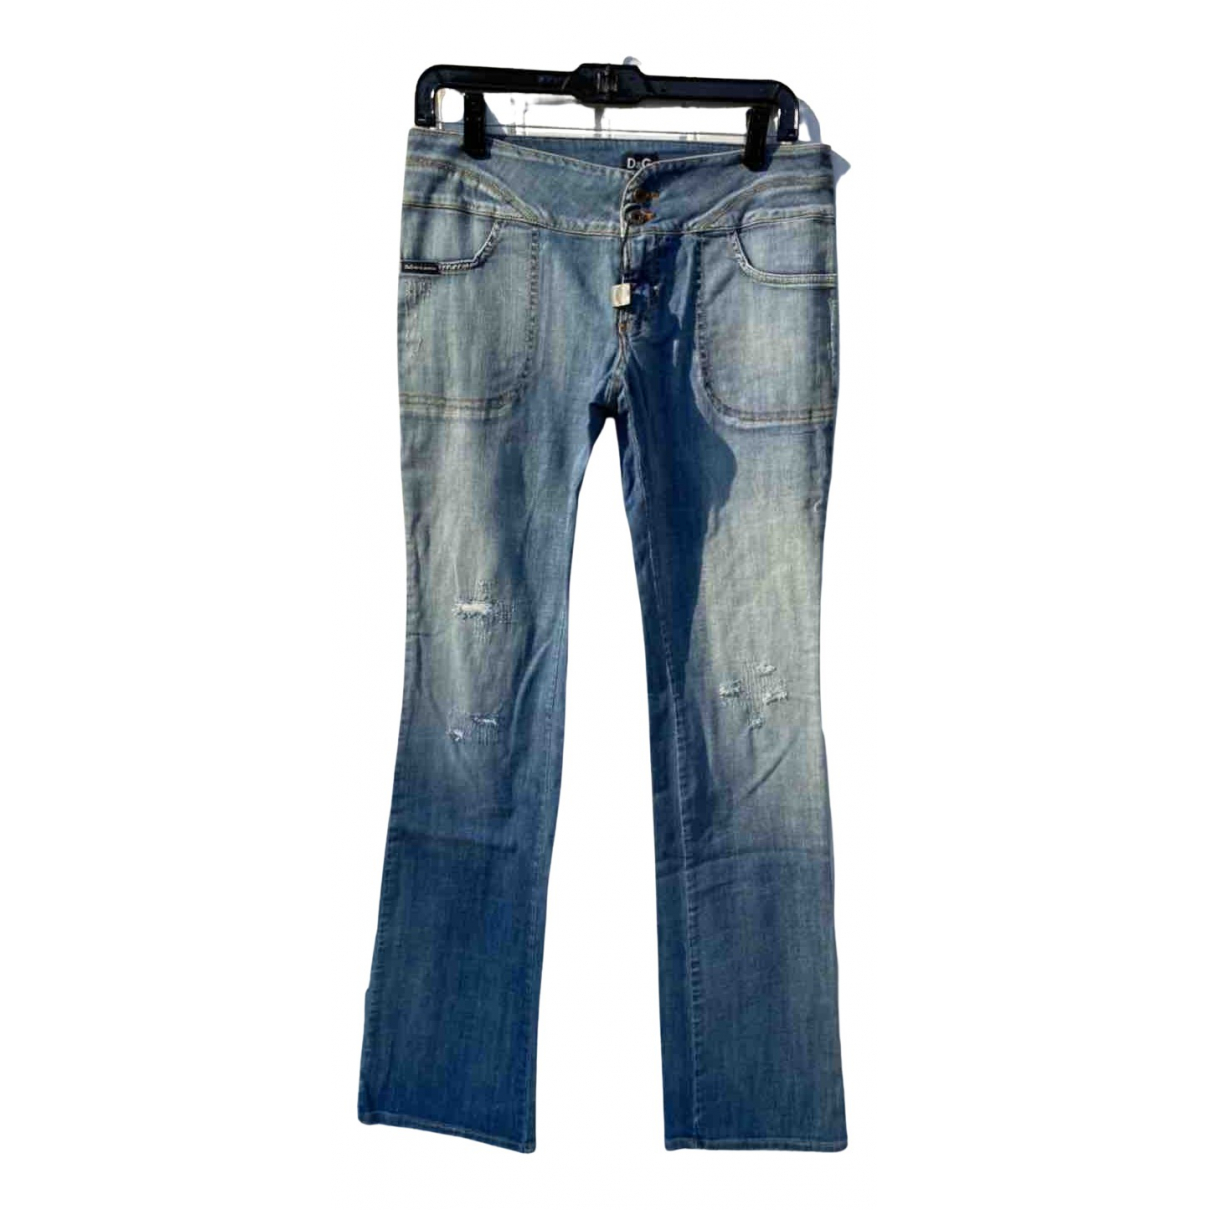 Slim Finally popular brand Special price for a limited time jeans